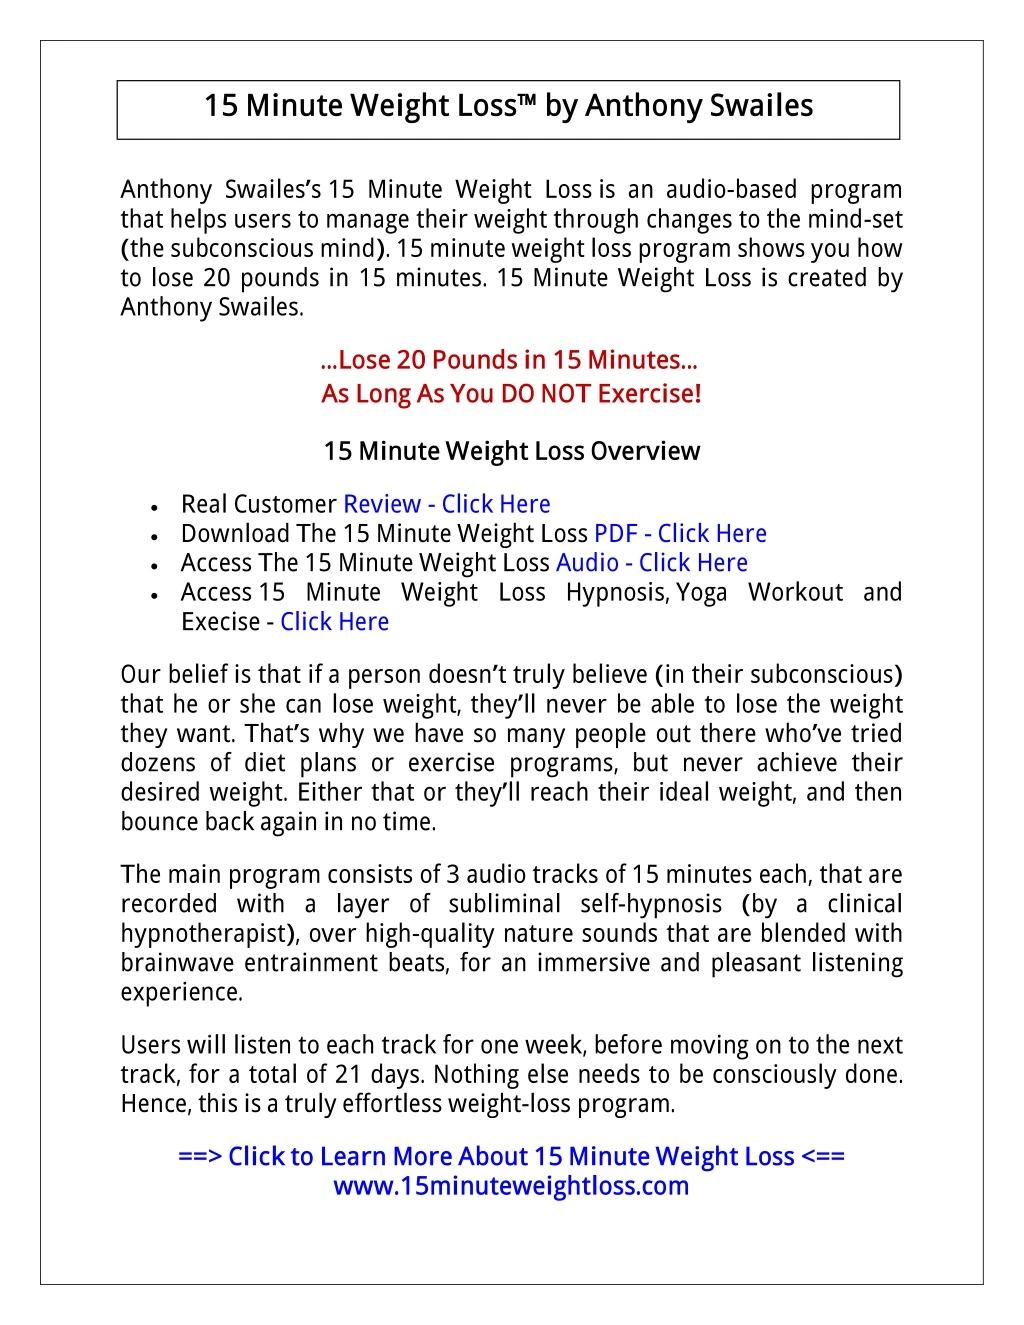 15 minute weight loss by anthony swailes